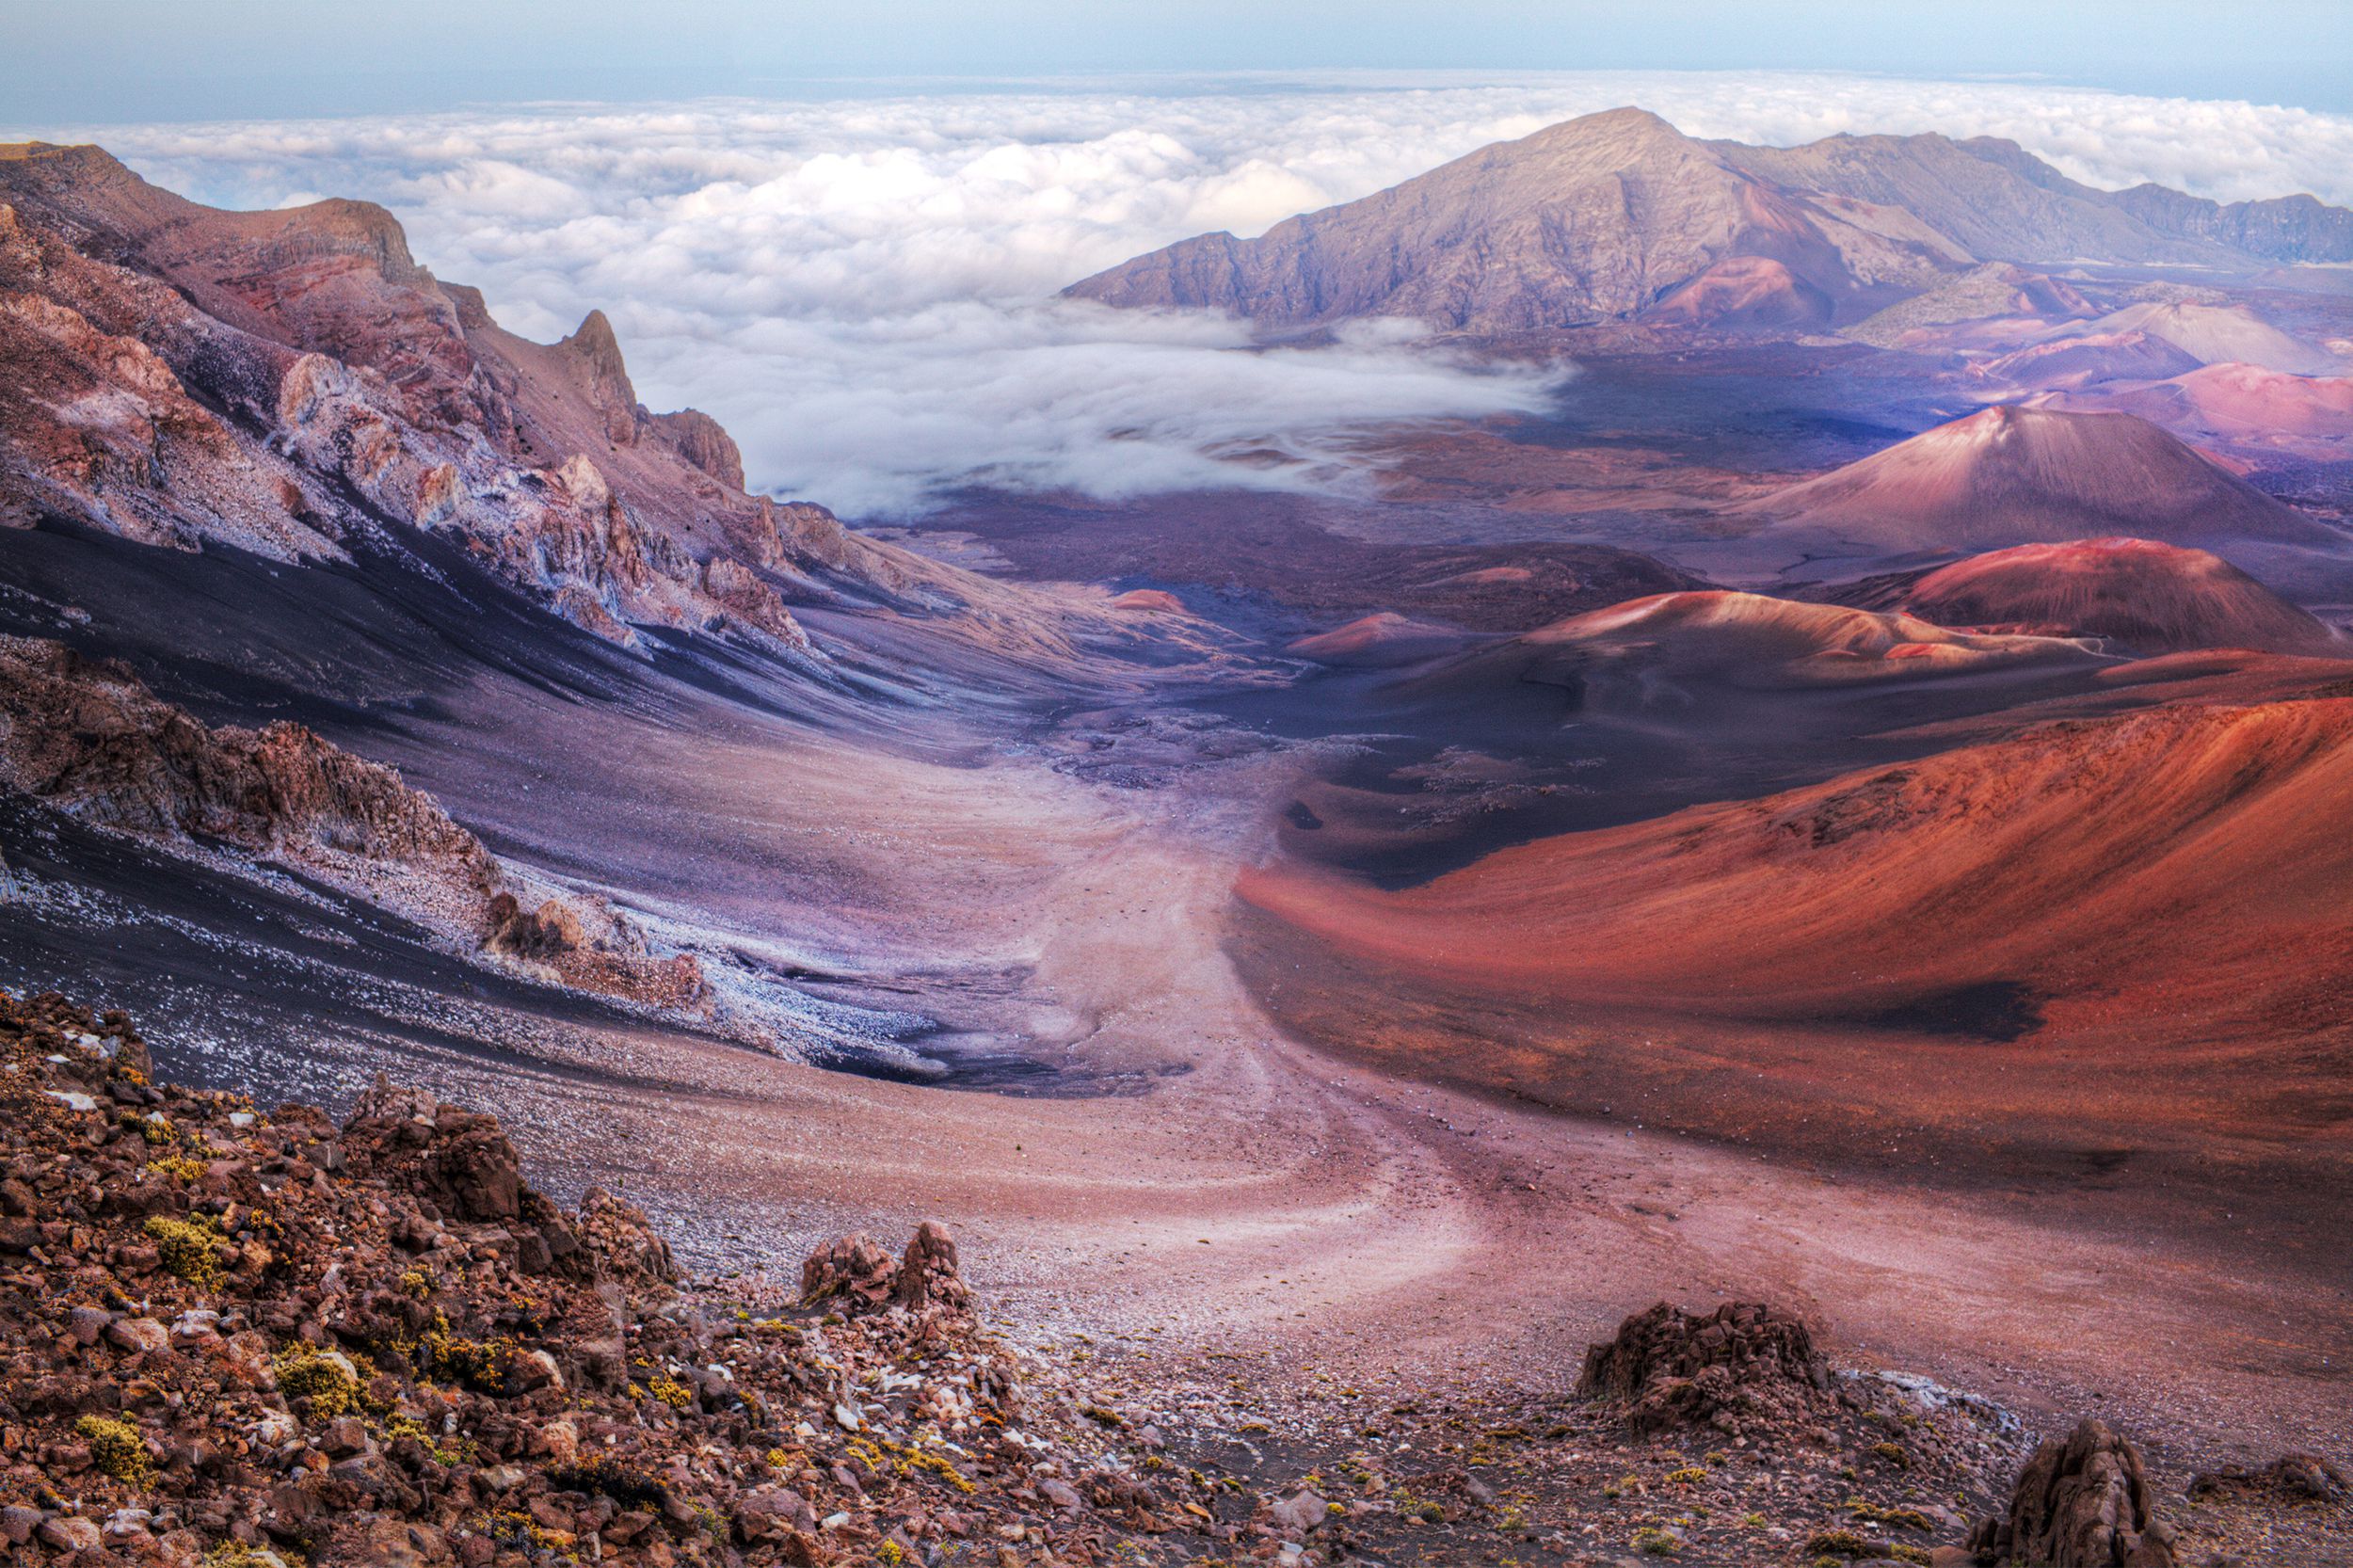 This 34,000-acre landscape includes everything from subtropical, coastal rain forest to volcanoes, and there are animal species in <a href="https://www.nps.gov/hale/index.htm">Haleakalā National Park</a> that are not found anywhere else on the planet including the Hawaiian hoary bat and the Haleakalā flightless moth.